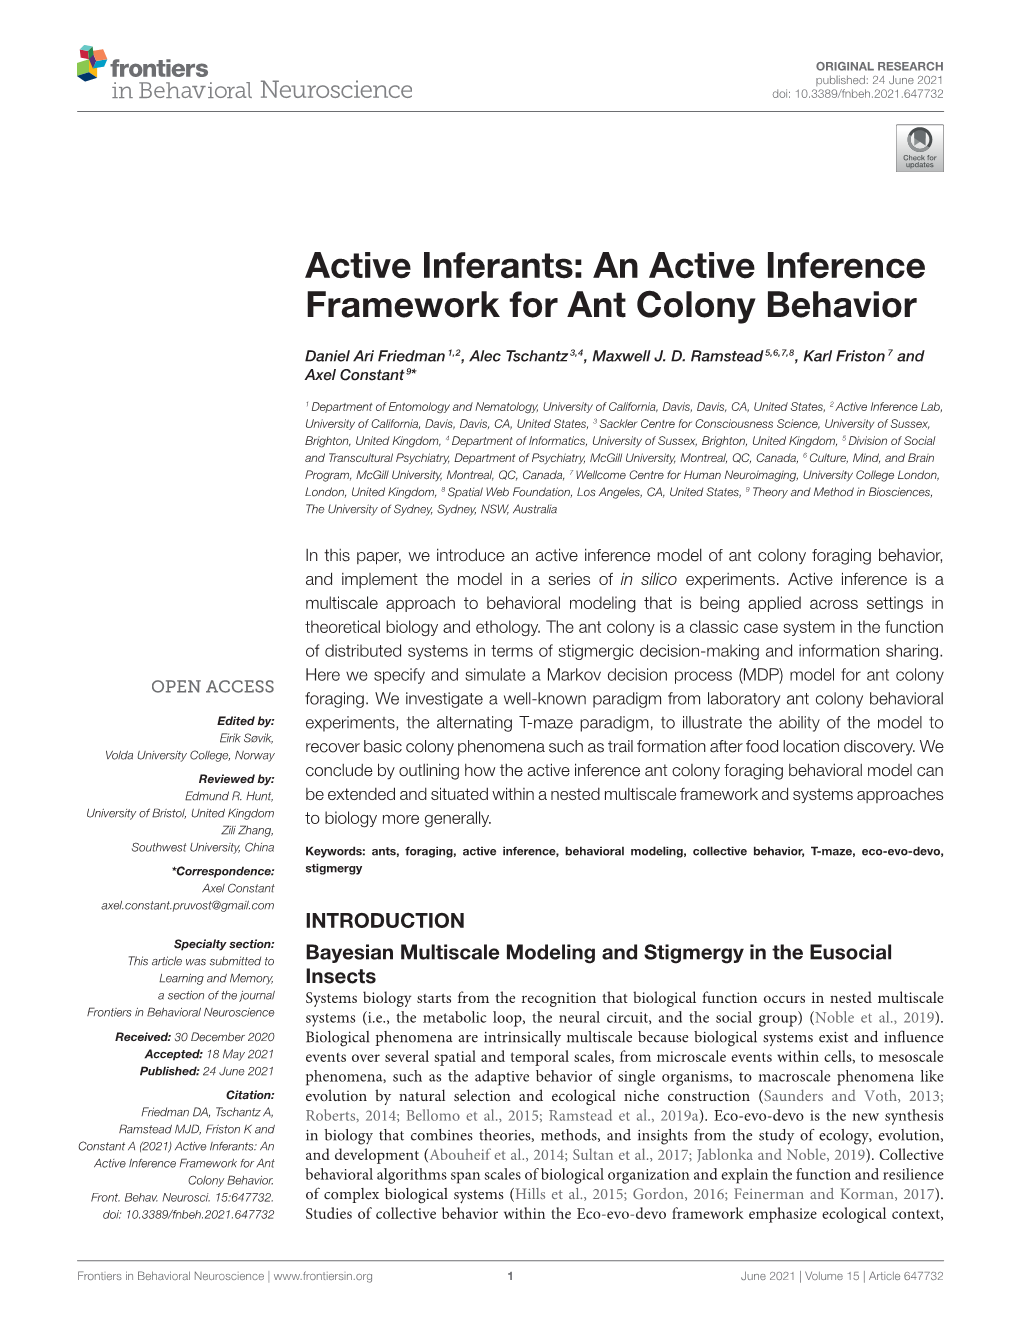 An Active Inference Framework for Ant Colony Behavior